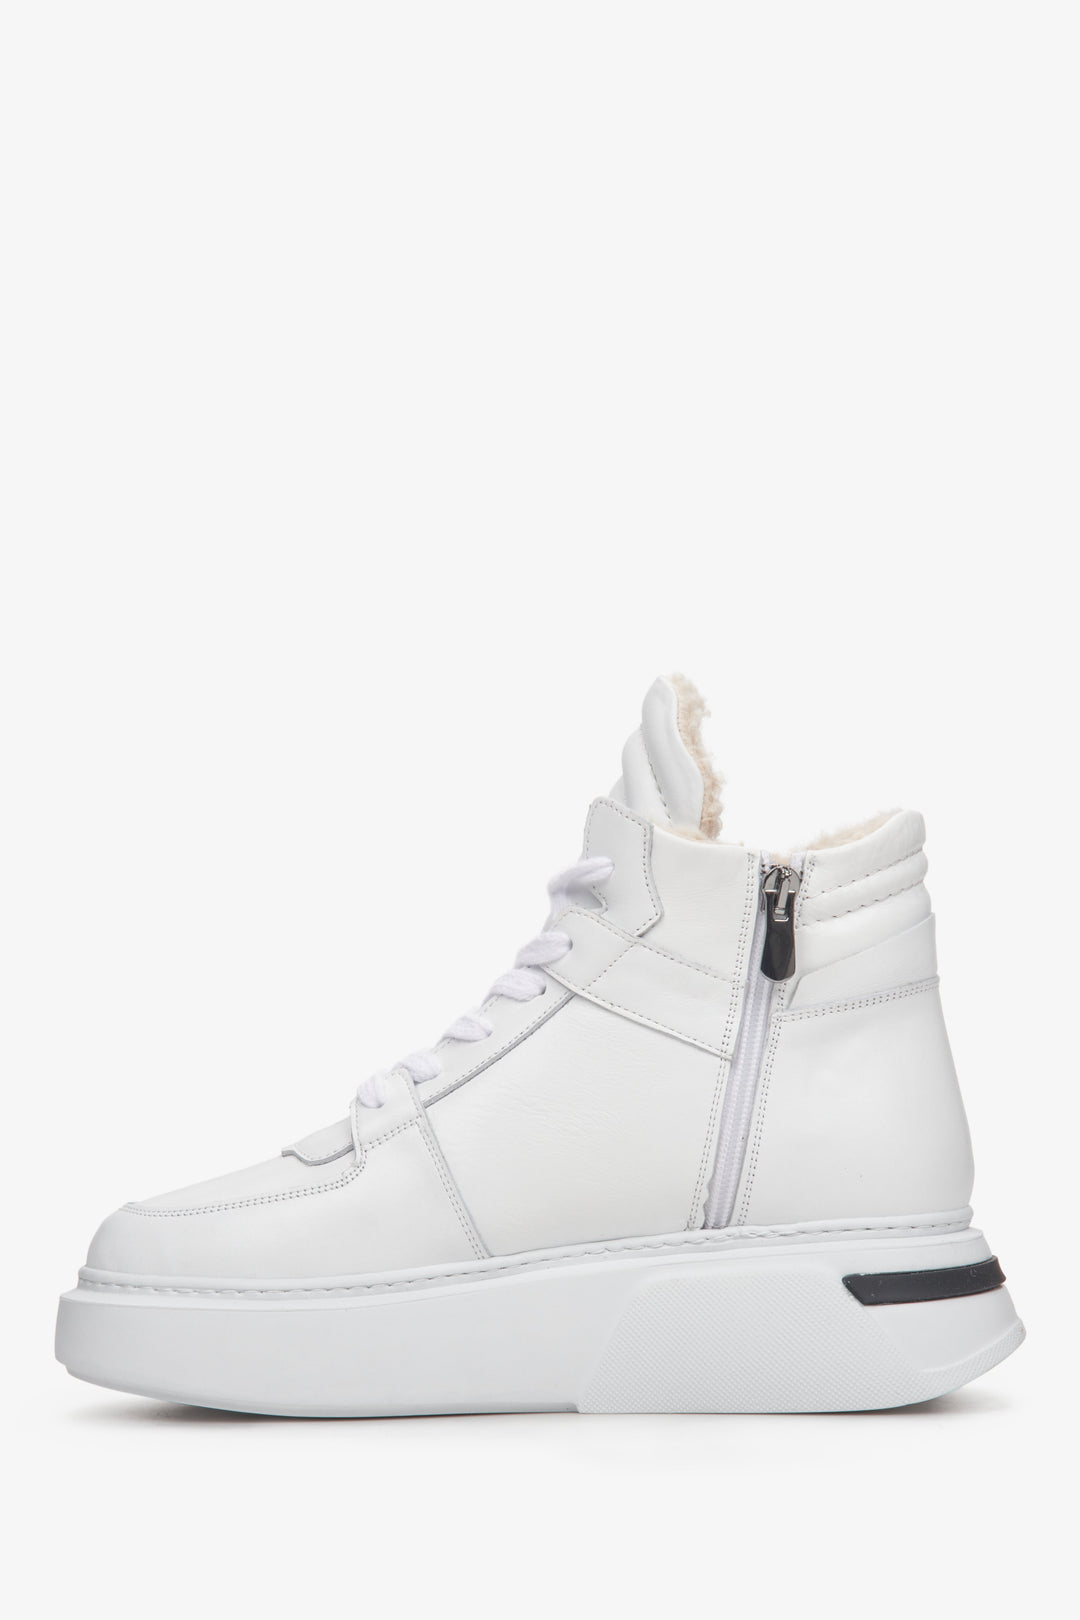 White high-top women's winter sneakers with insulation by Estro - shoe profile.